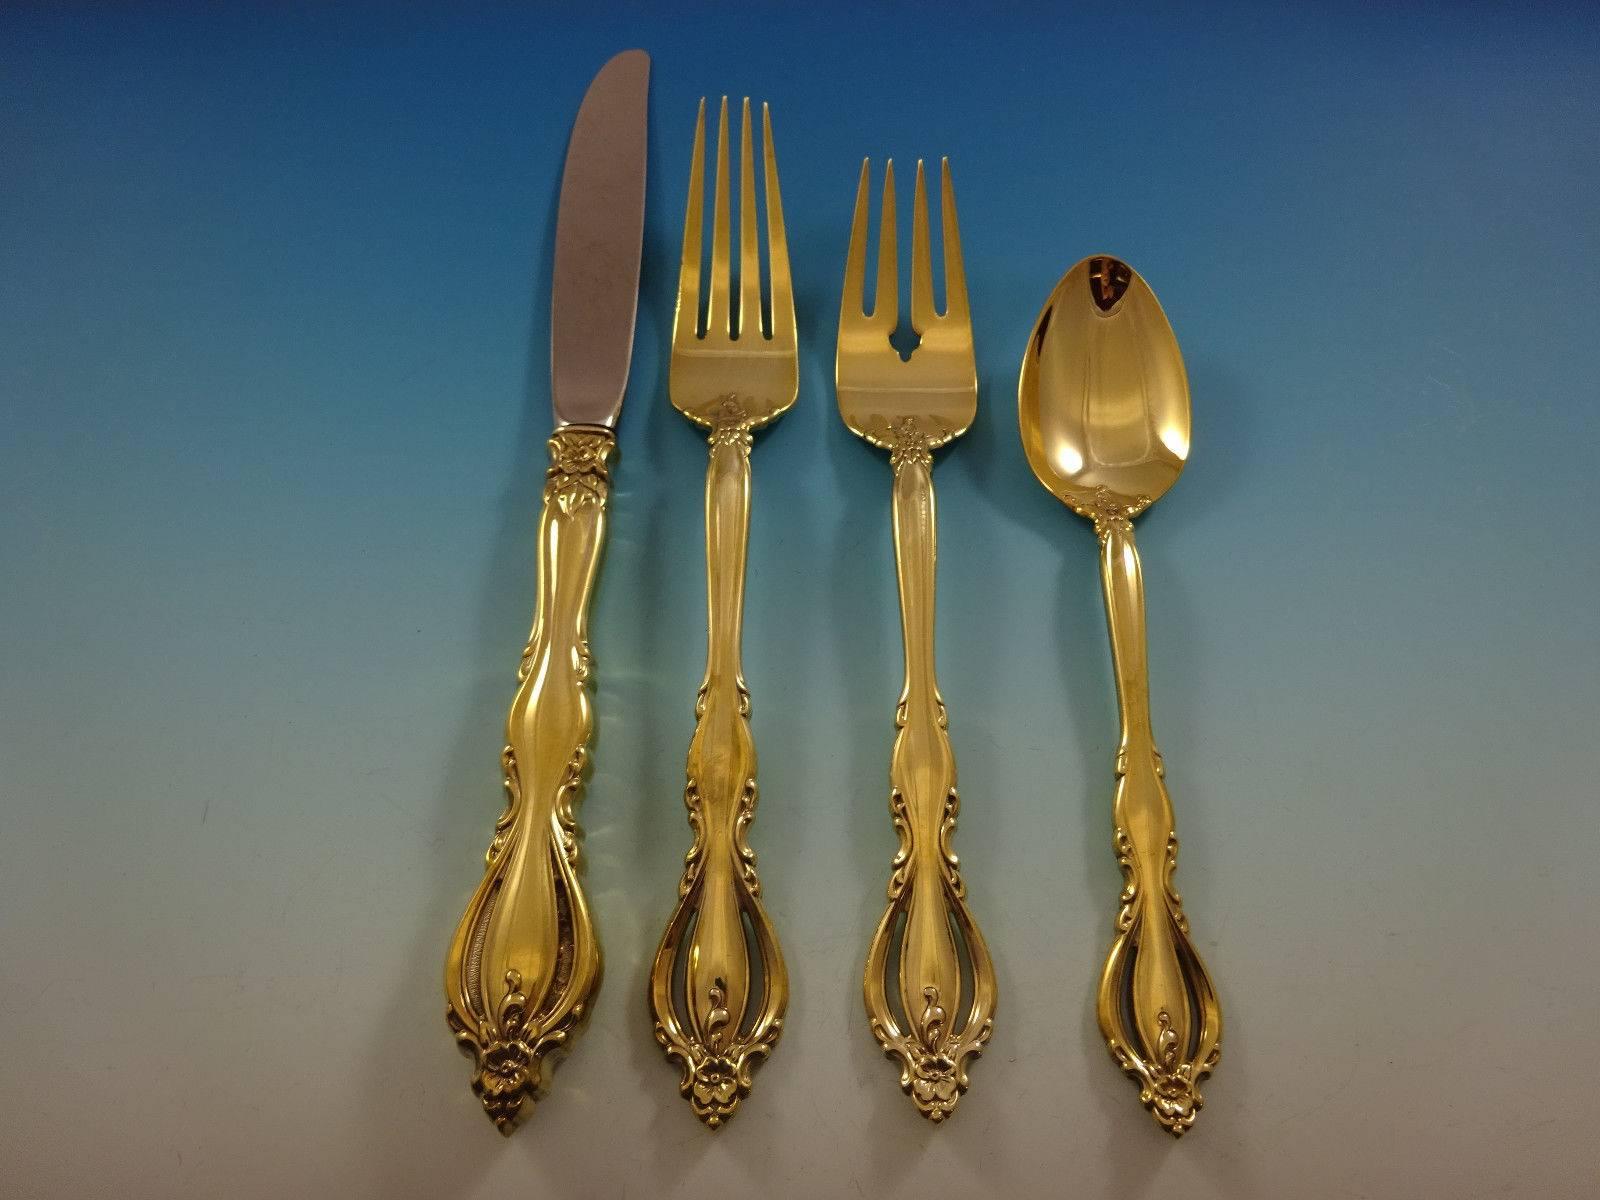 Grand Regency by International sterling silver flatware set of 32 pieces. Gold flatware is on trend and makes a bold statement on your table, especially when paired with gold rimmed china and gold accents. 

This set is vermeil (completely